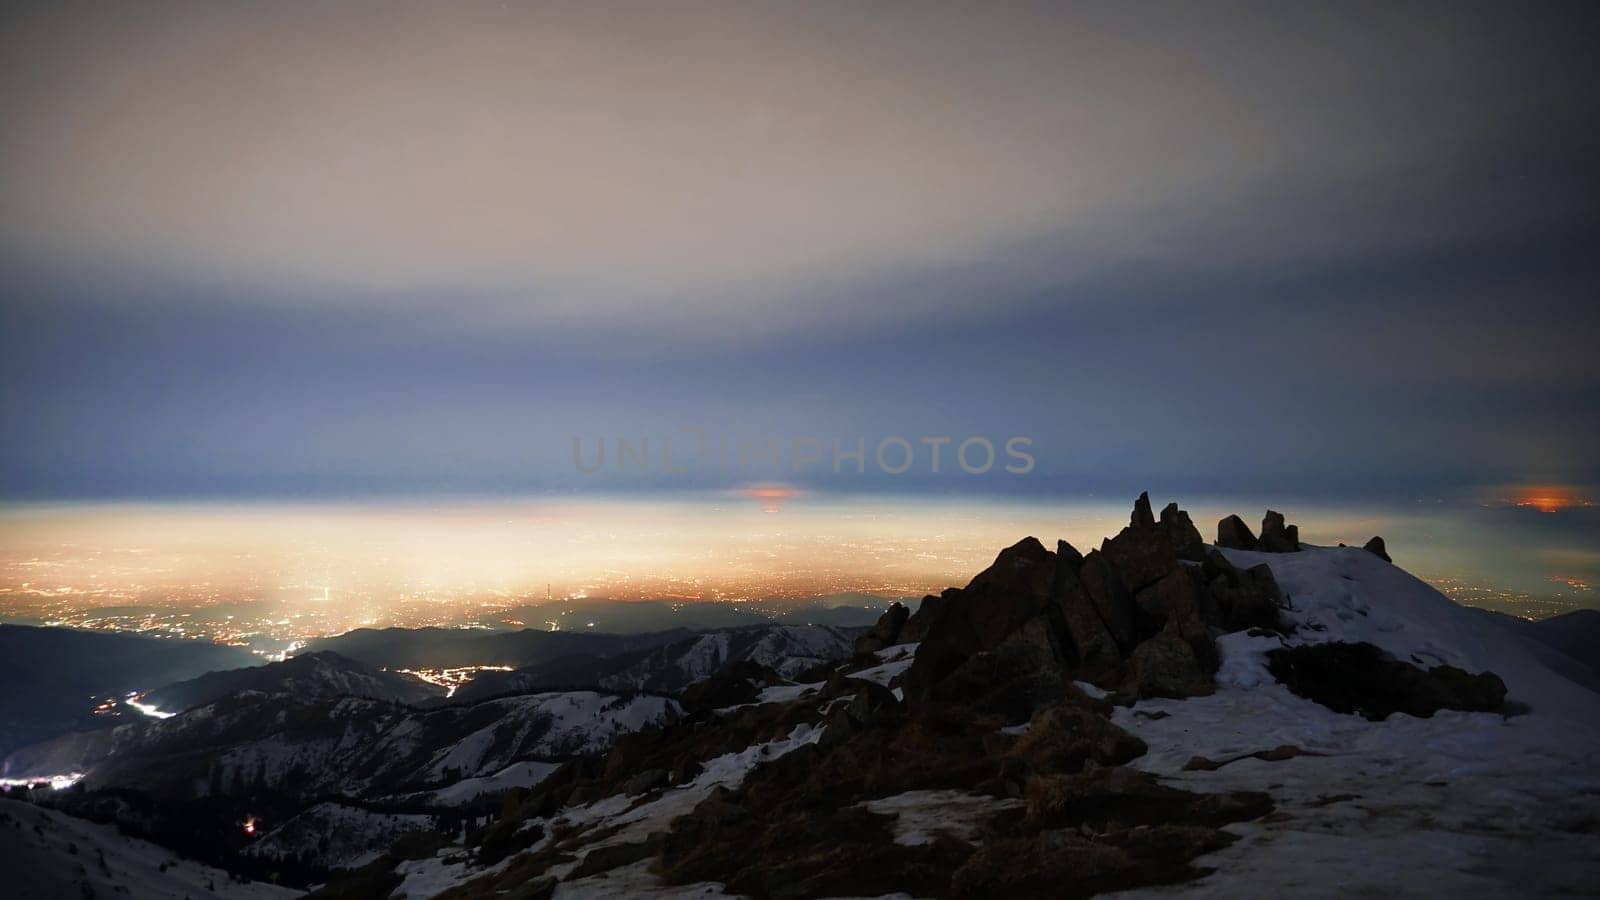 View of the night city from the snowy mountains. The glow from the city rises to the clouds. Bright lights are visible. In places, even the stars are visible. Steep cliffs, big rocks and snow. Almaty